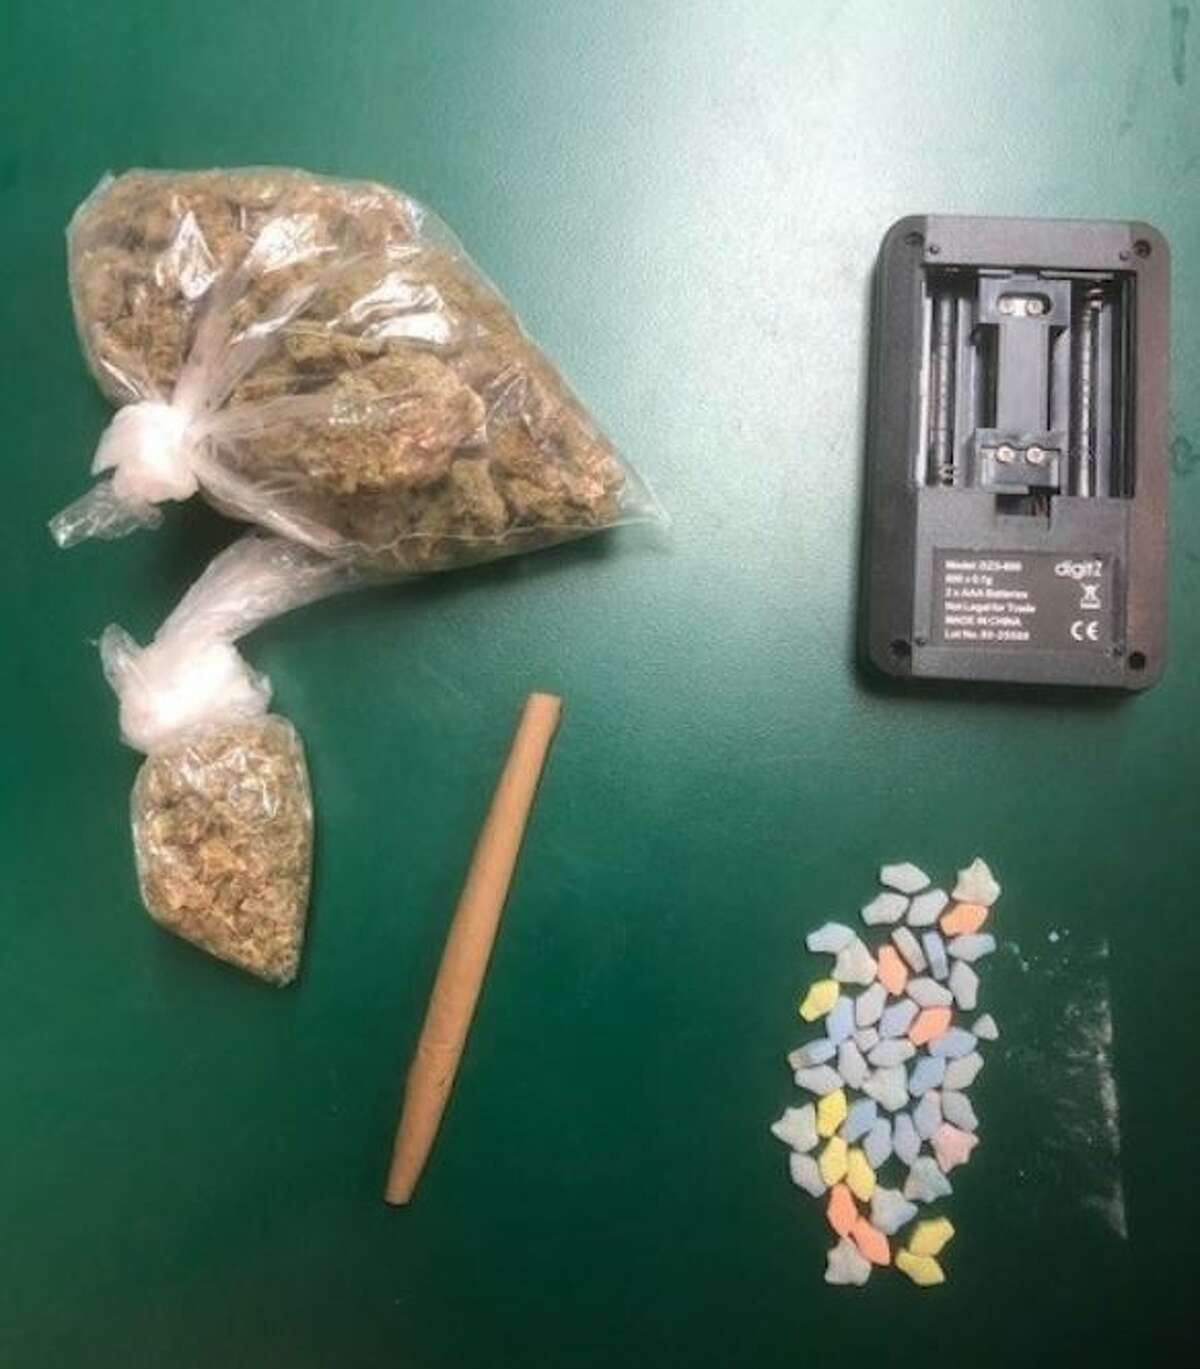 Rio Grande Valley Sector Border Patrol seized 45 pills of ecstasy, some marijuana and two loaded handguns on Saturday.